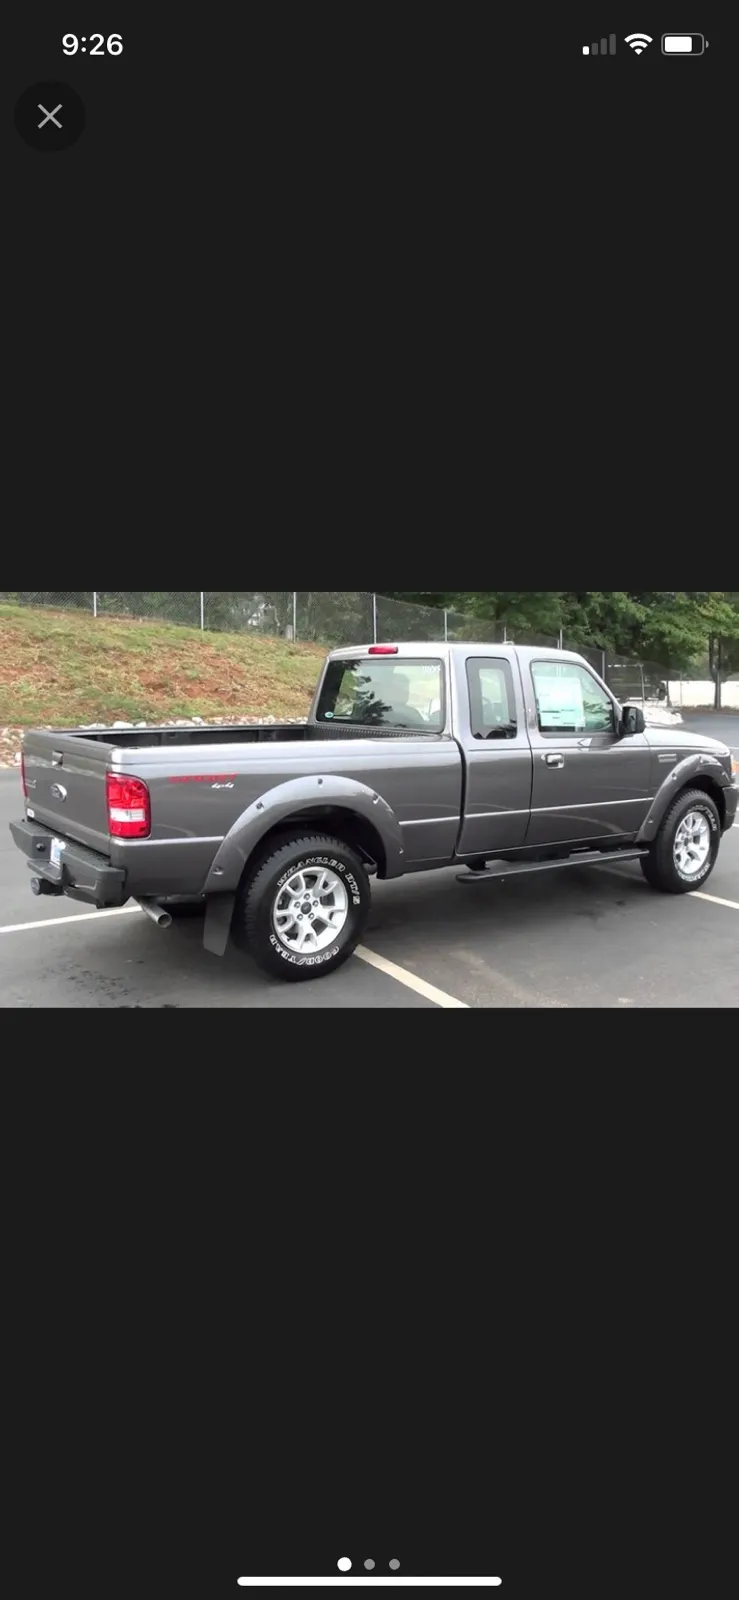 Wanted: Ford Ranger, Mazda Truck